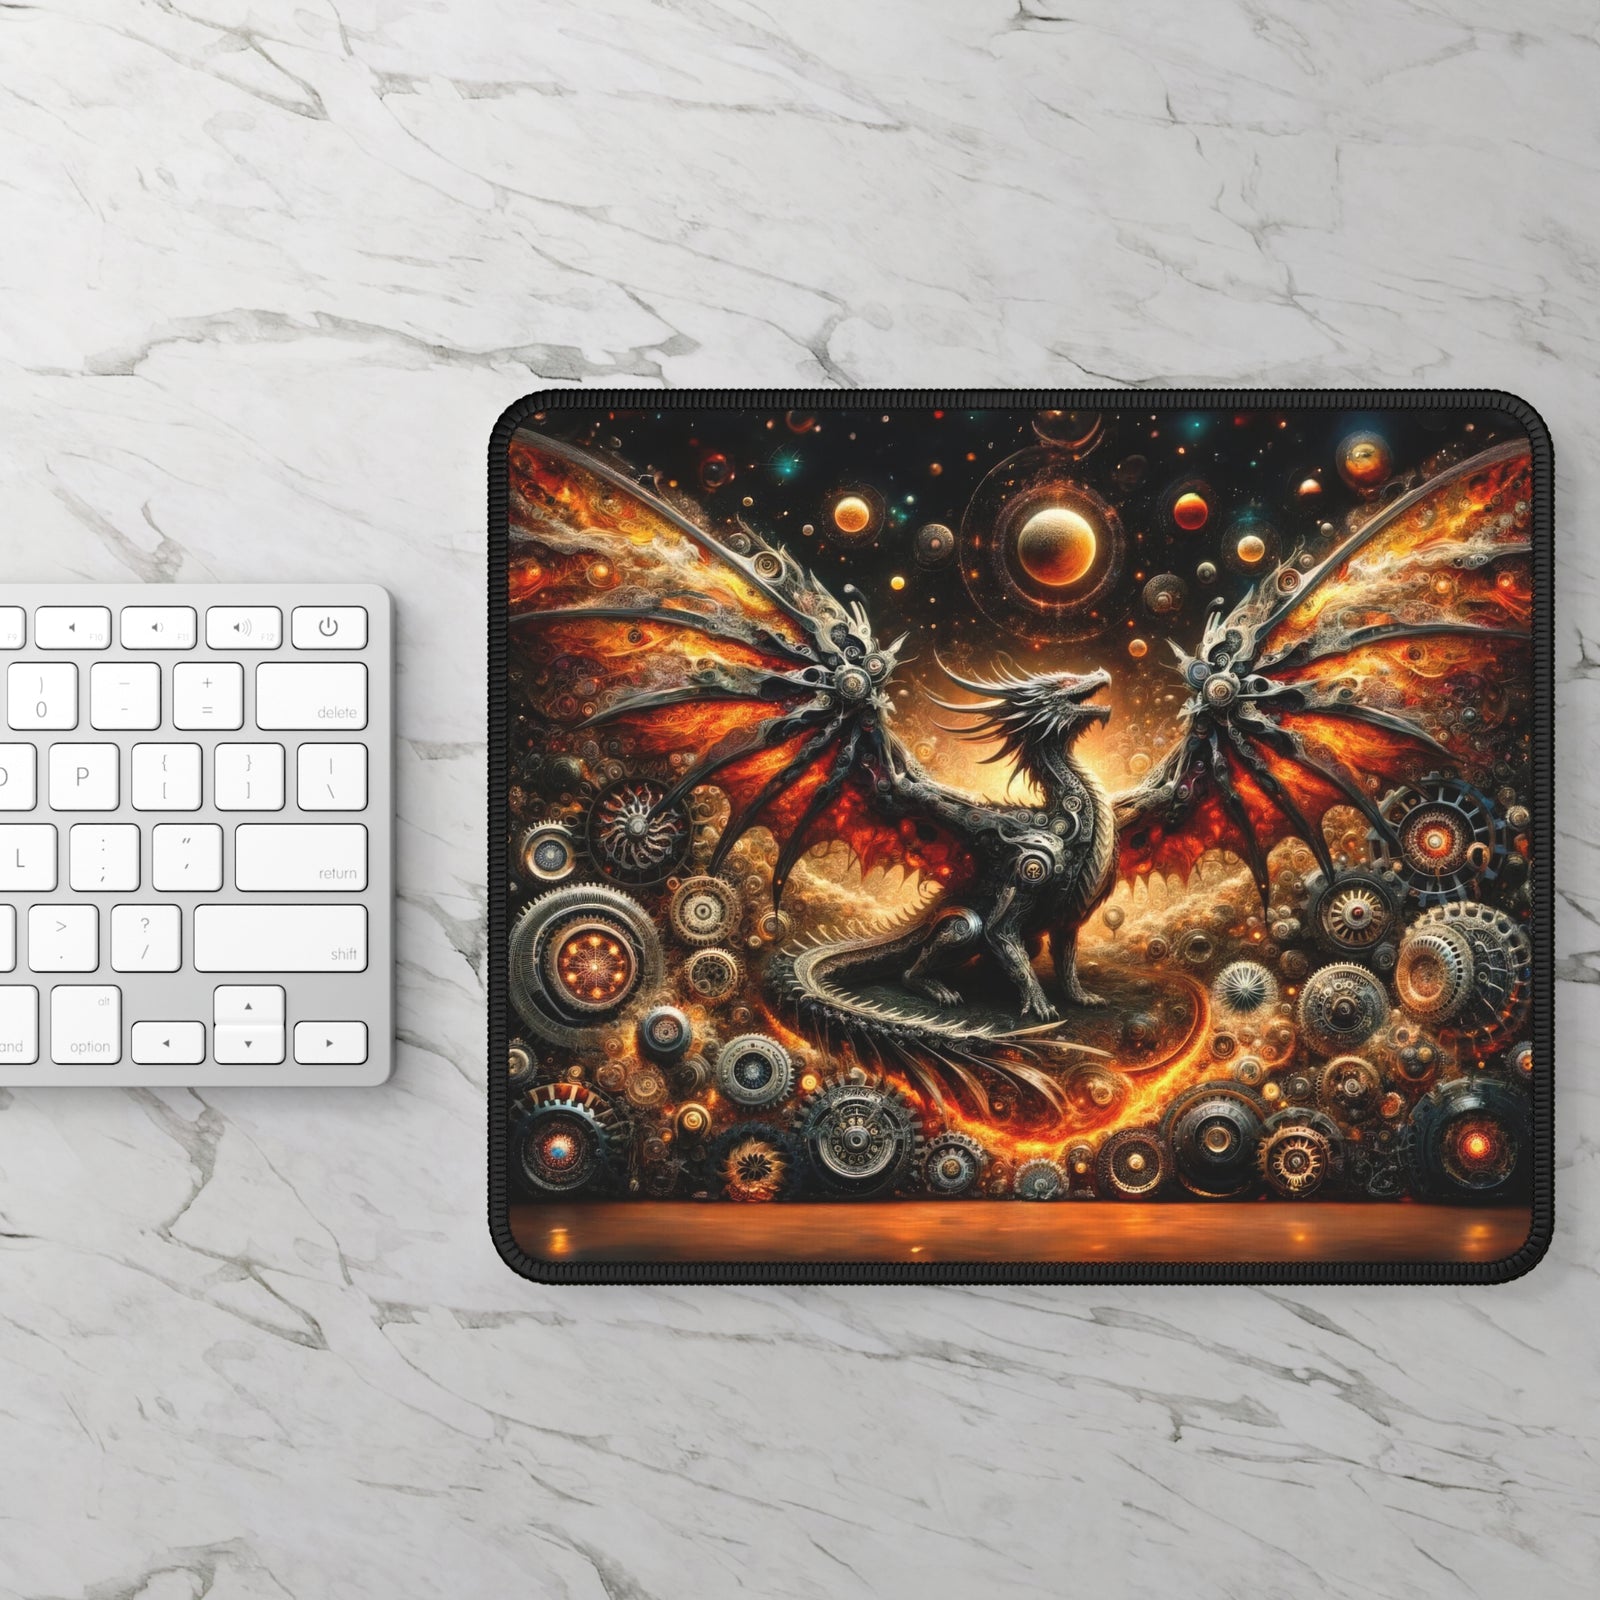 The Automaton Dragon Gaming Mouse Pad